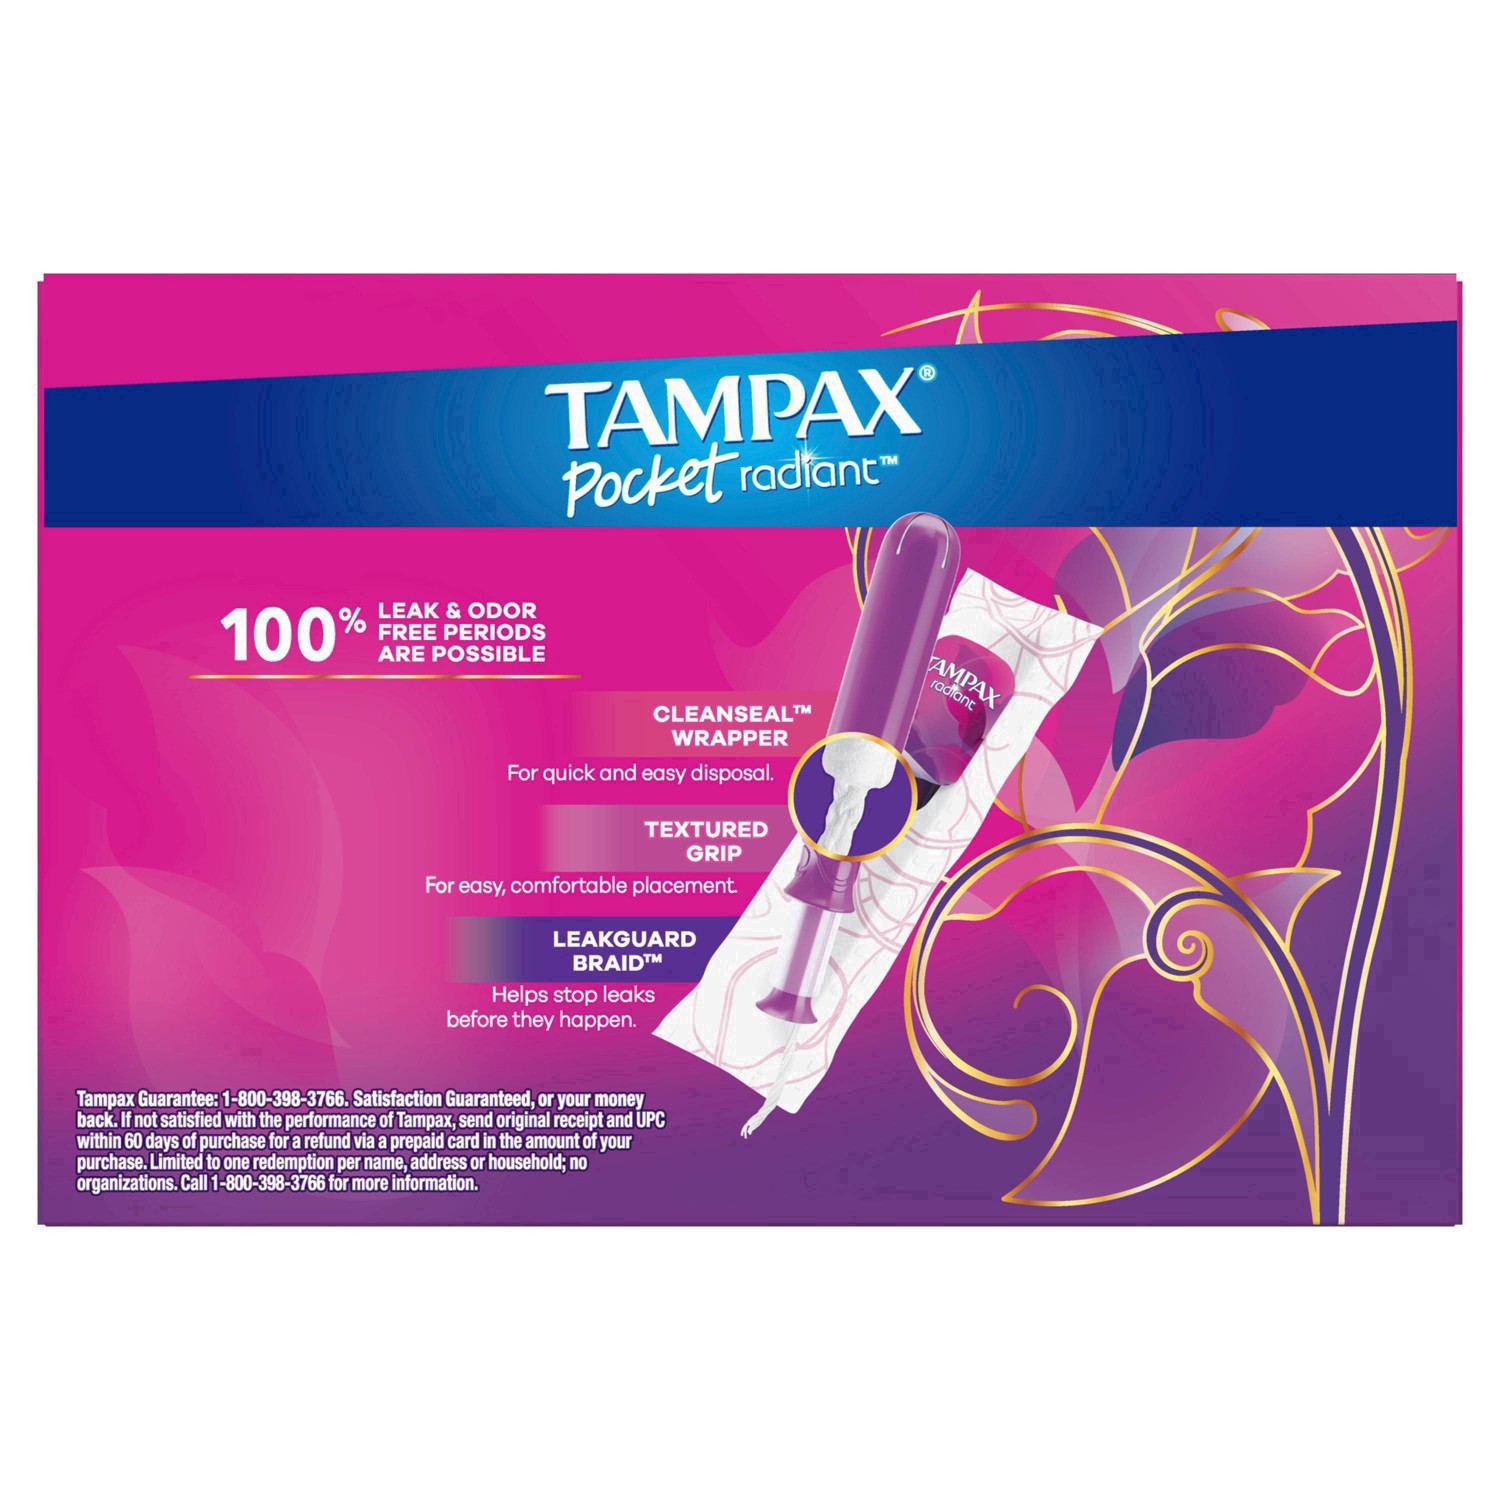 slide 64 of 94, Tampax Pocket Radiant Compact Plastic Tampons, With LeakGuard Braid, Super Absorbency, Unscented, 28 Count, 28 ct